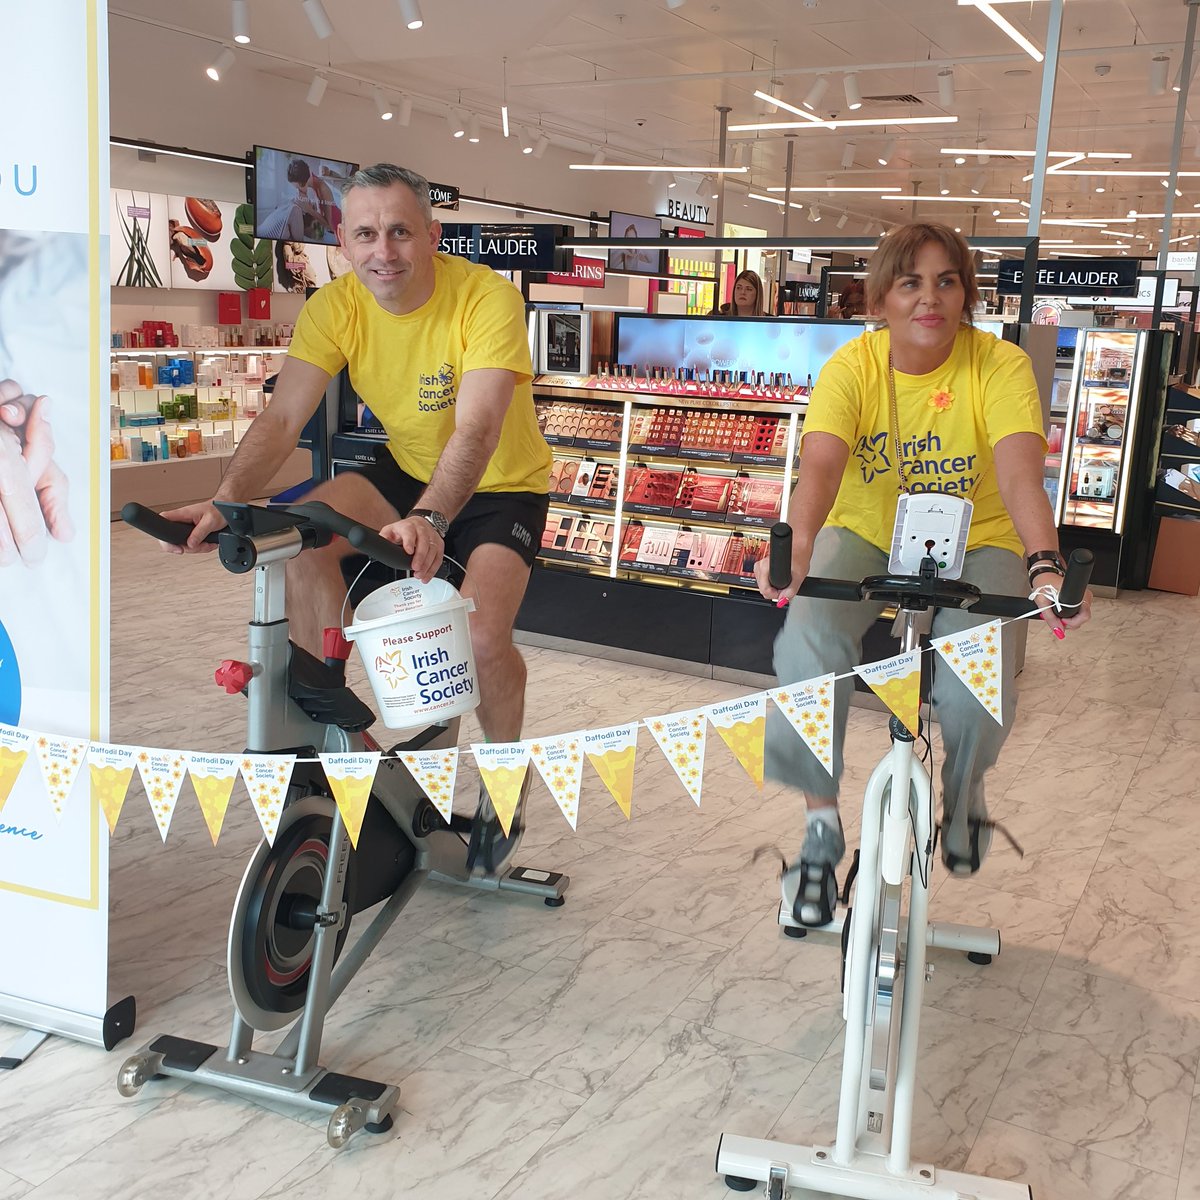 Delighted to support @IrishCancerSoc in Boots Liffervalley. I'll be cycling for the next hour.. Please support generously where ever you are today.